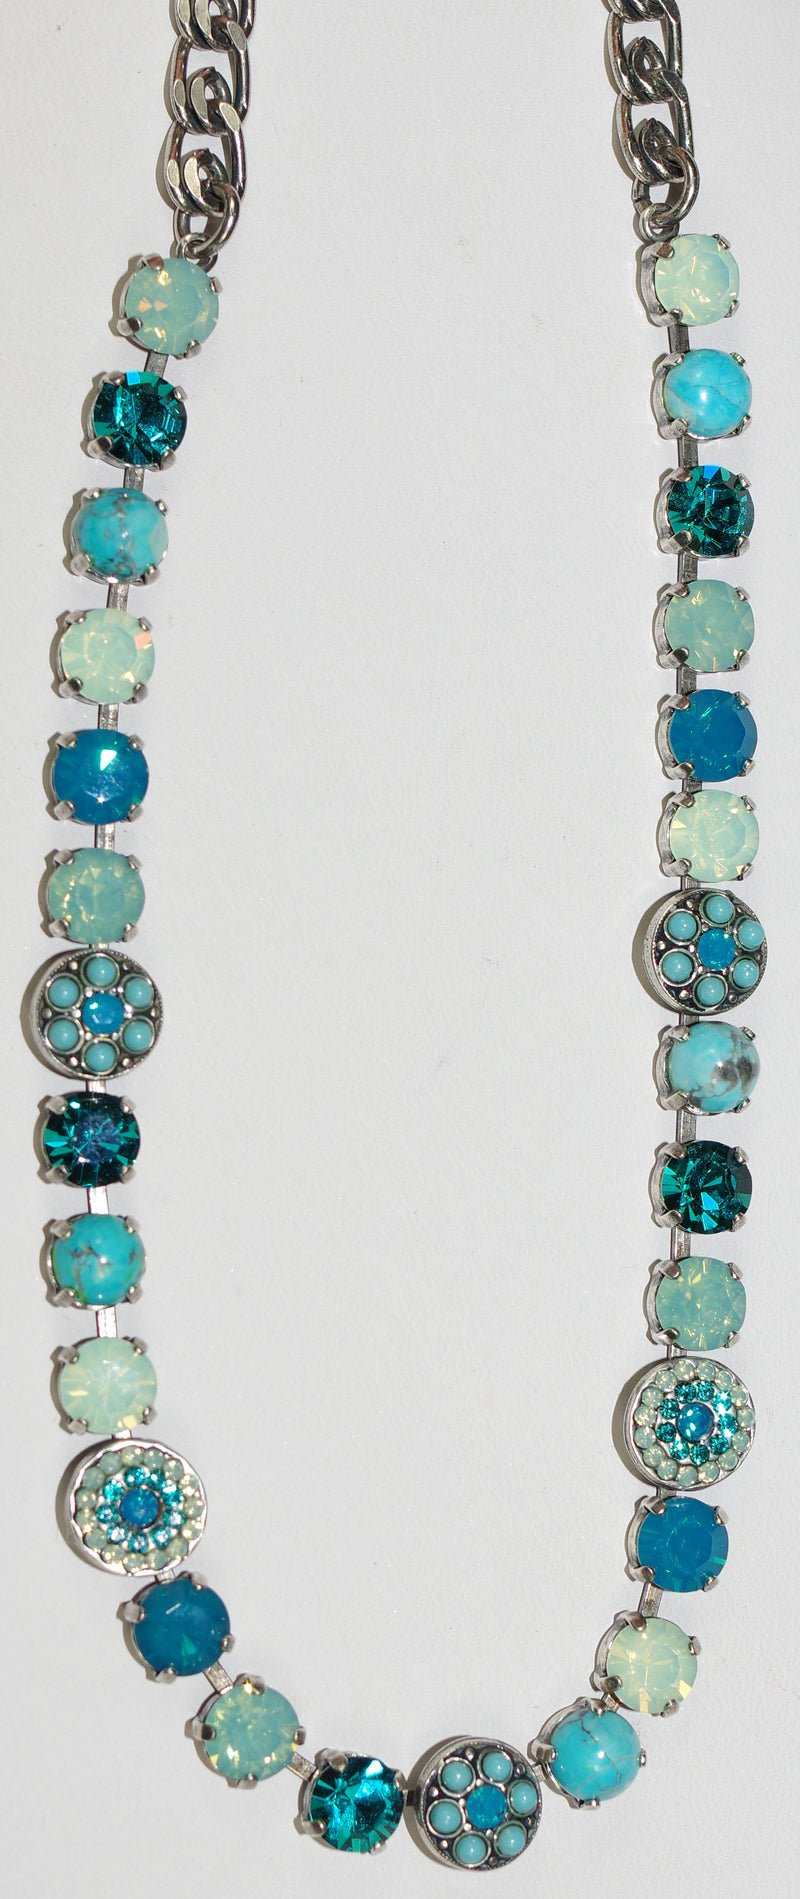 MARIANA NECKLACE BAHAMAS: pacific opal, teal, blue stones in silver setting, 17" adjustable chain